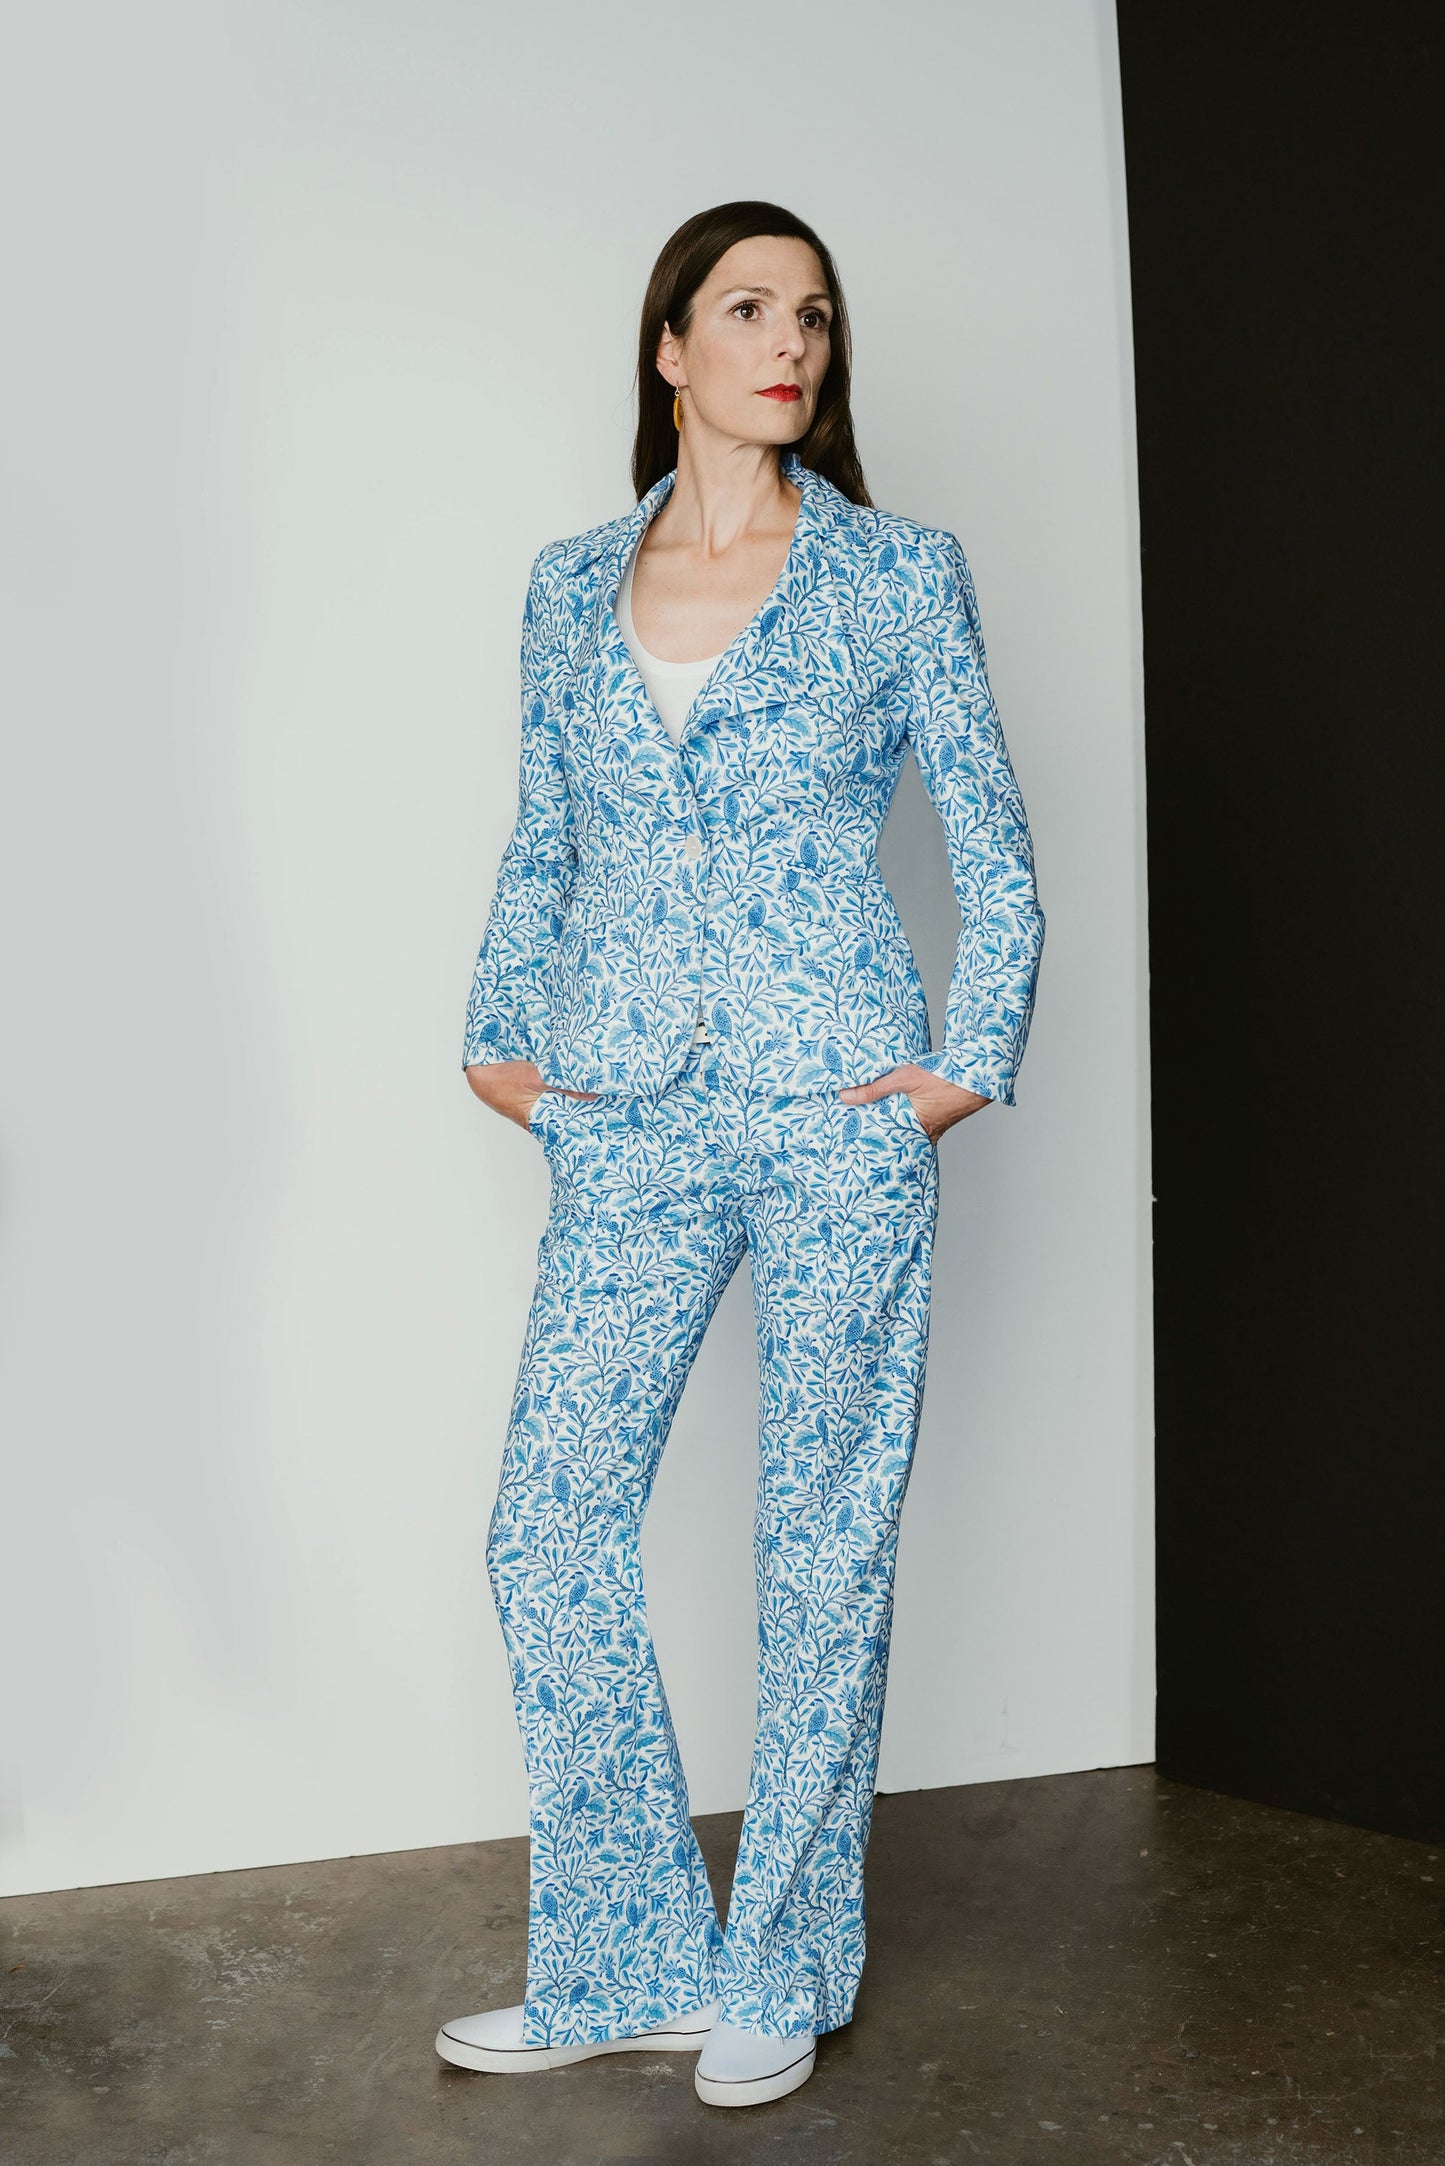 The Pin-Tuck Printed Trouser